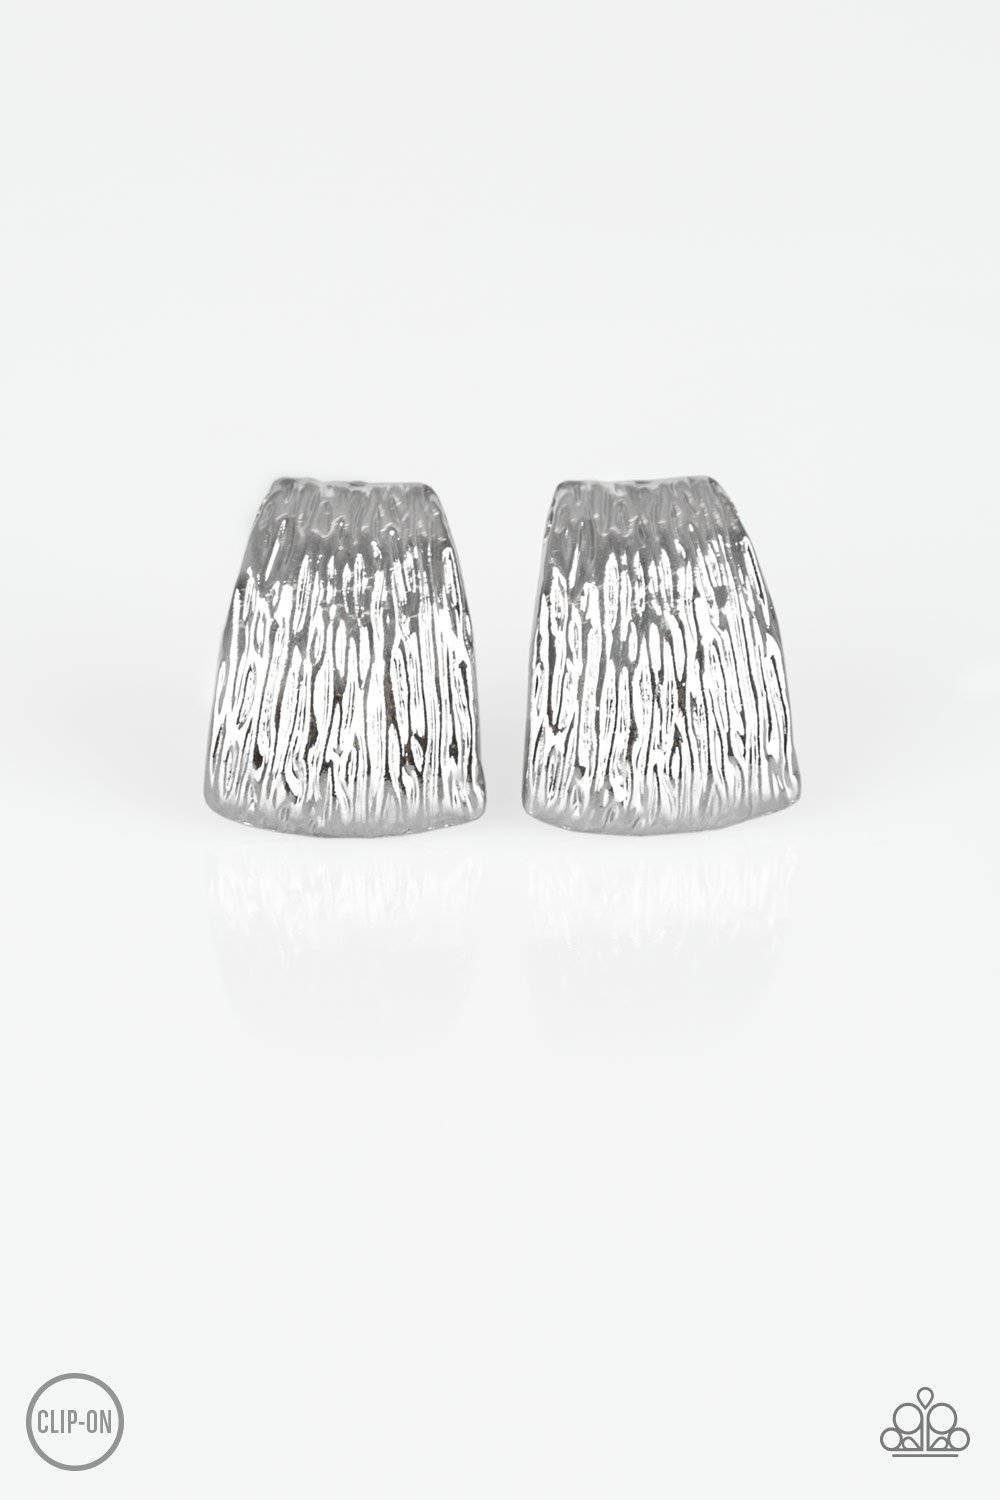 Superstar Shimmer Silver Clip-on Earrings - Paparazzi Accessories - GlaMarous Titi Jewels